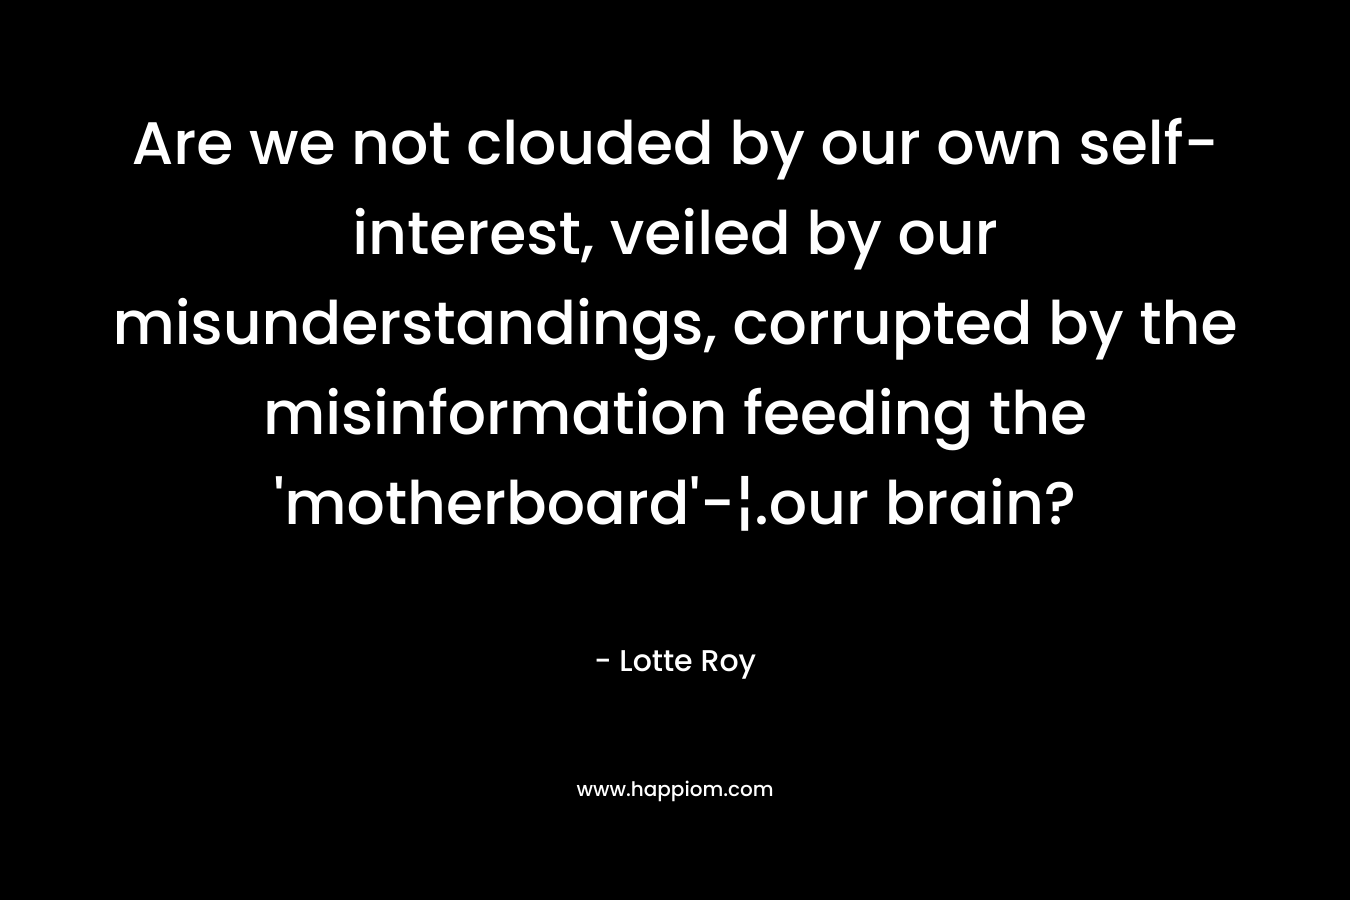 Are we not clouded by our own self-interest, veiled by our misunderstandings, corrupted by the misinformation feeding the ‘motherboard’-¦.our brain? – Lotte Roy